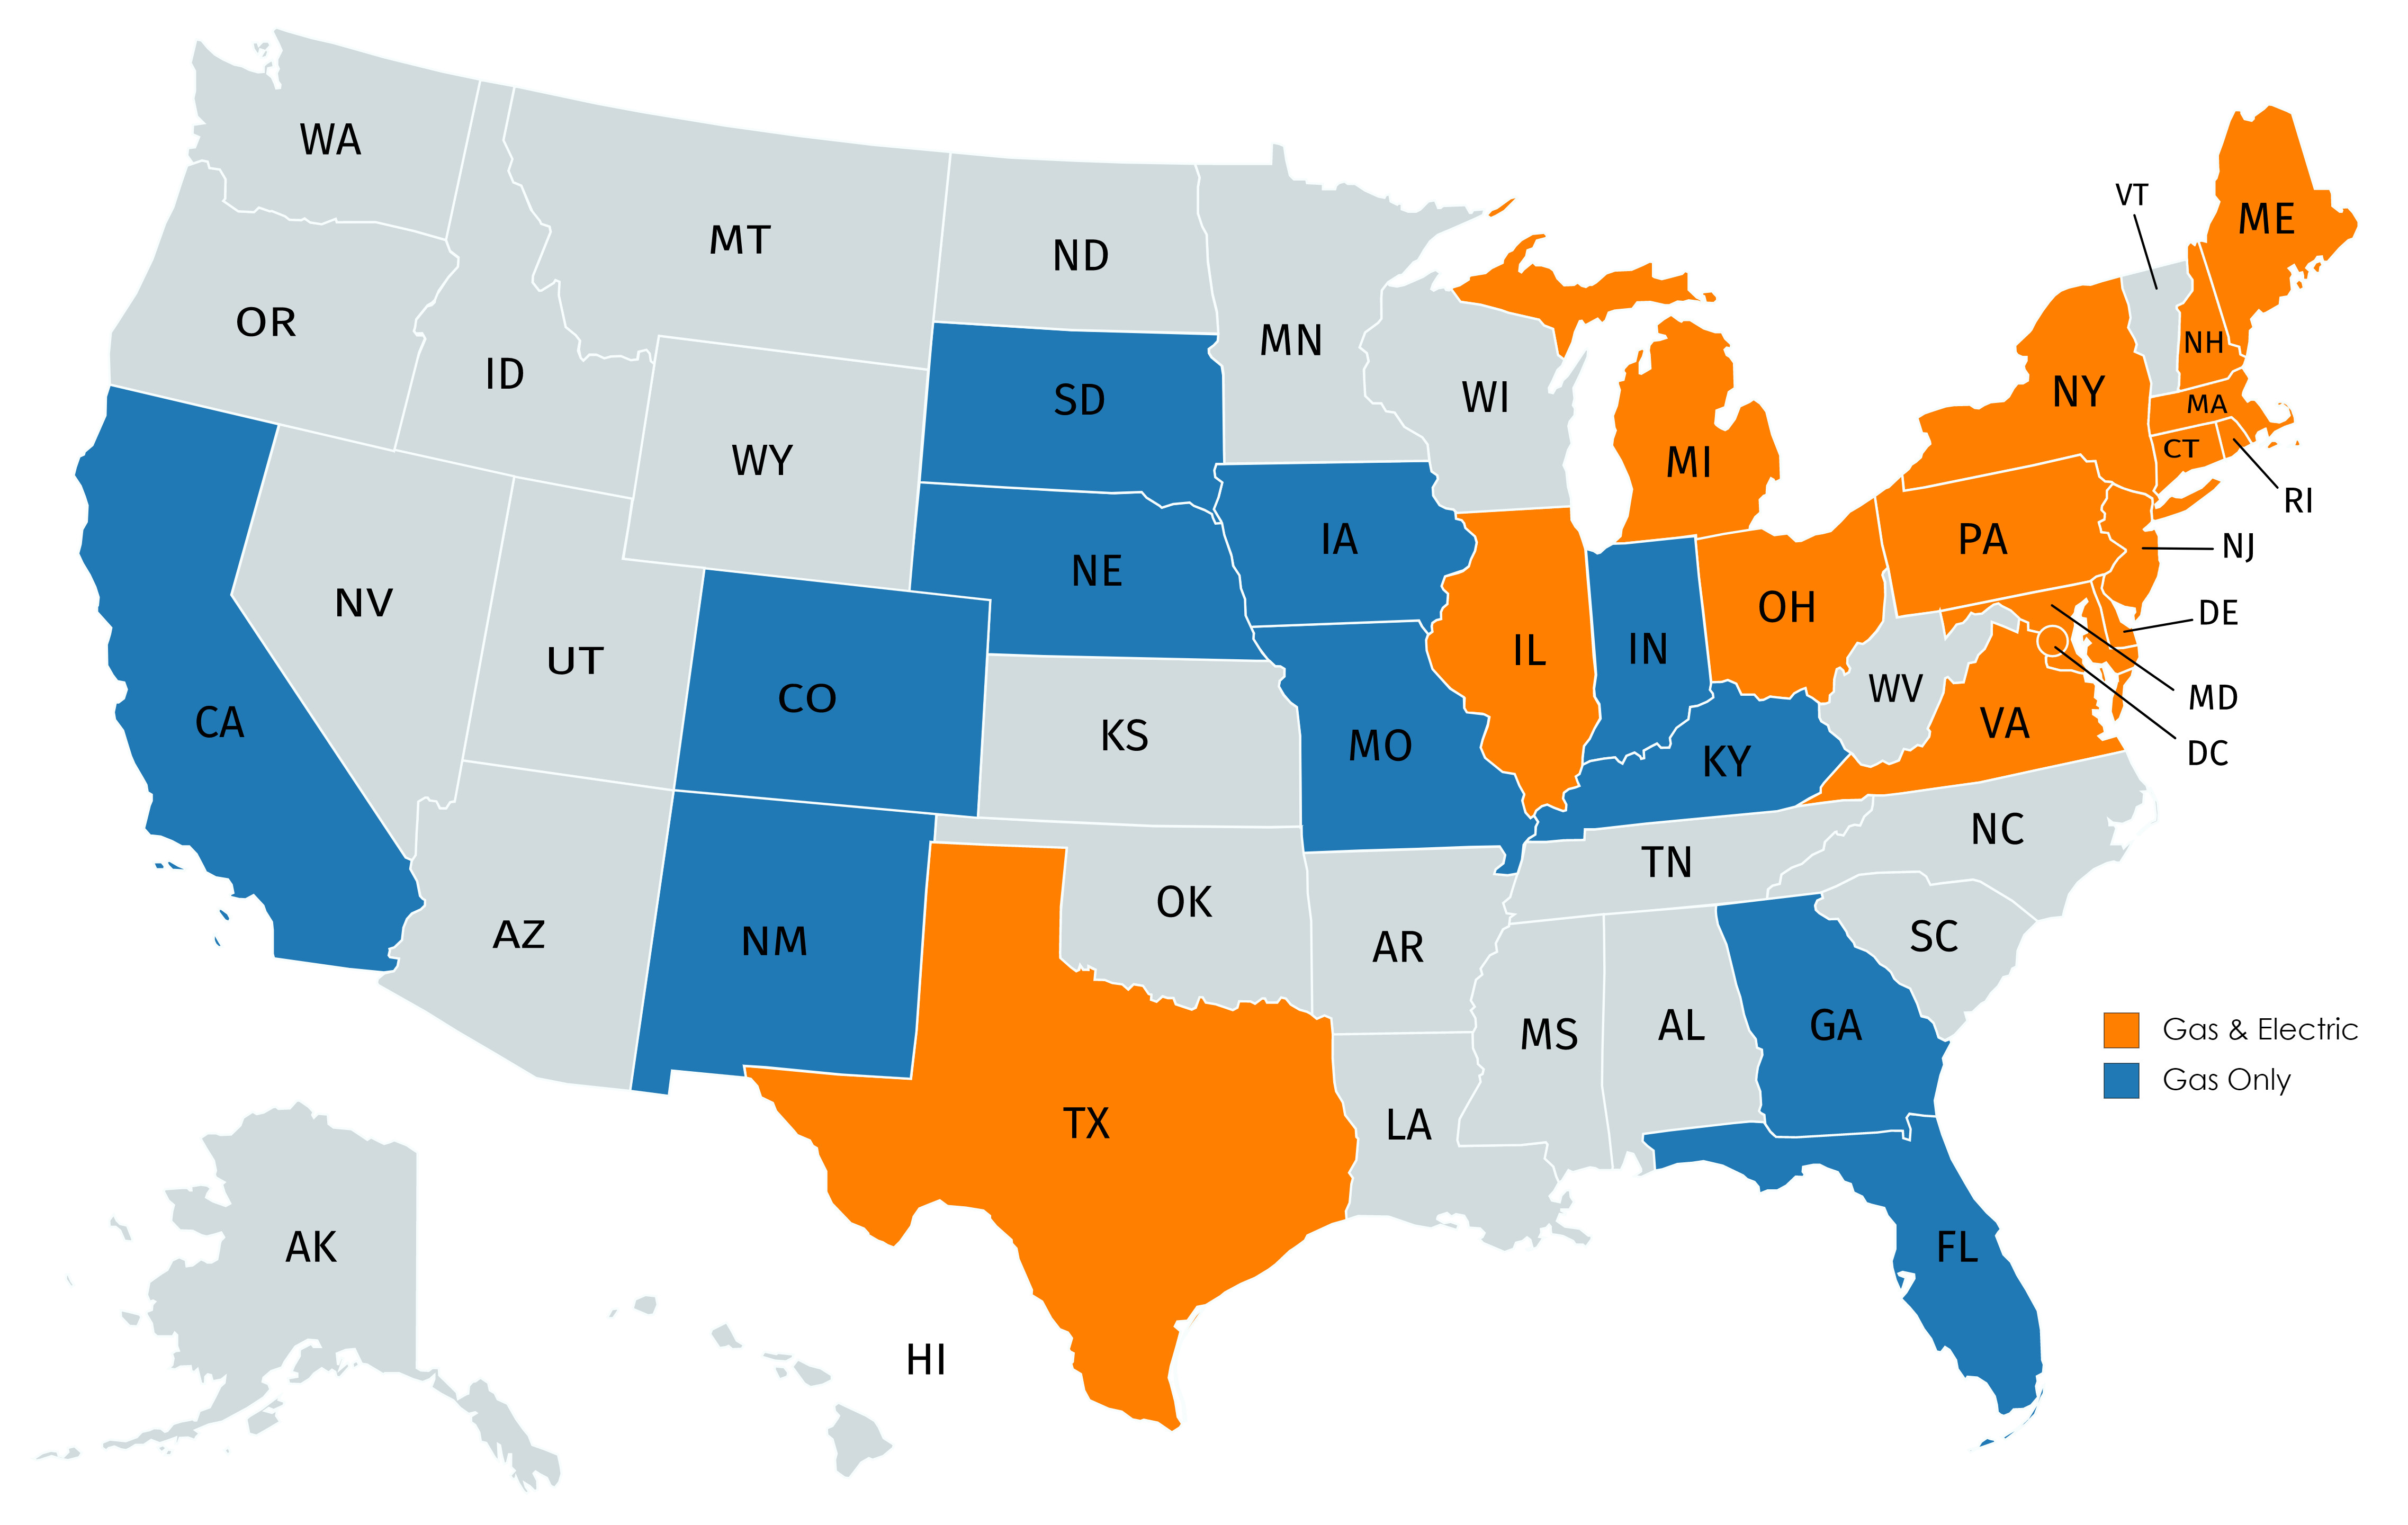 Map of United States showing deregulated states